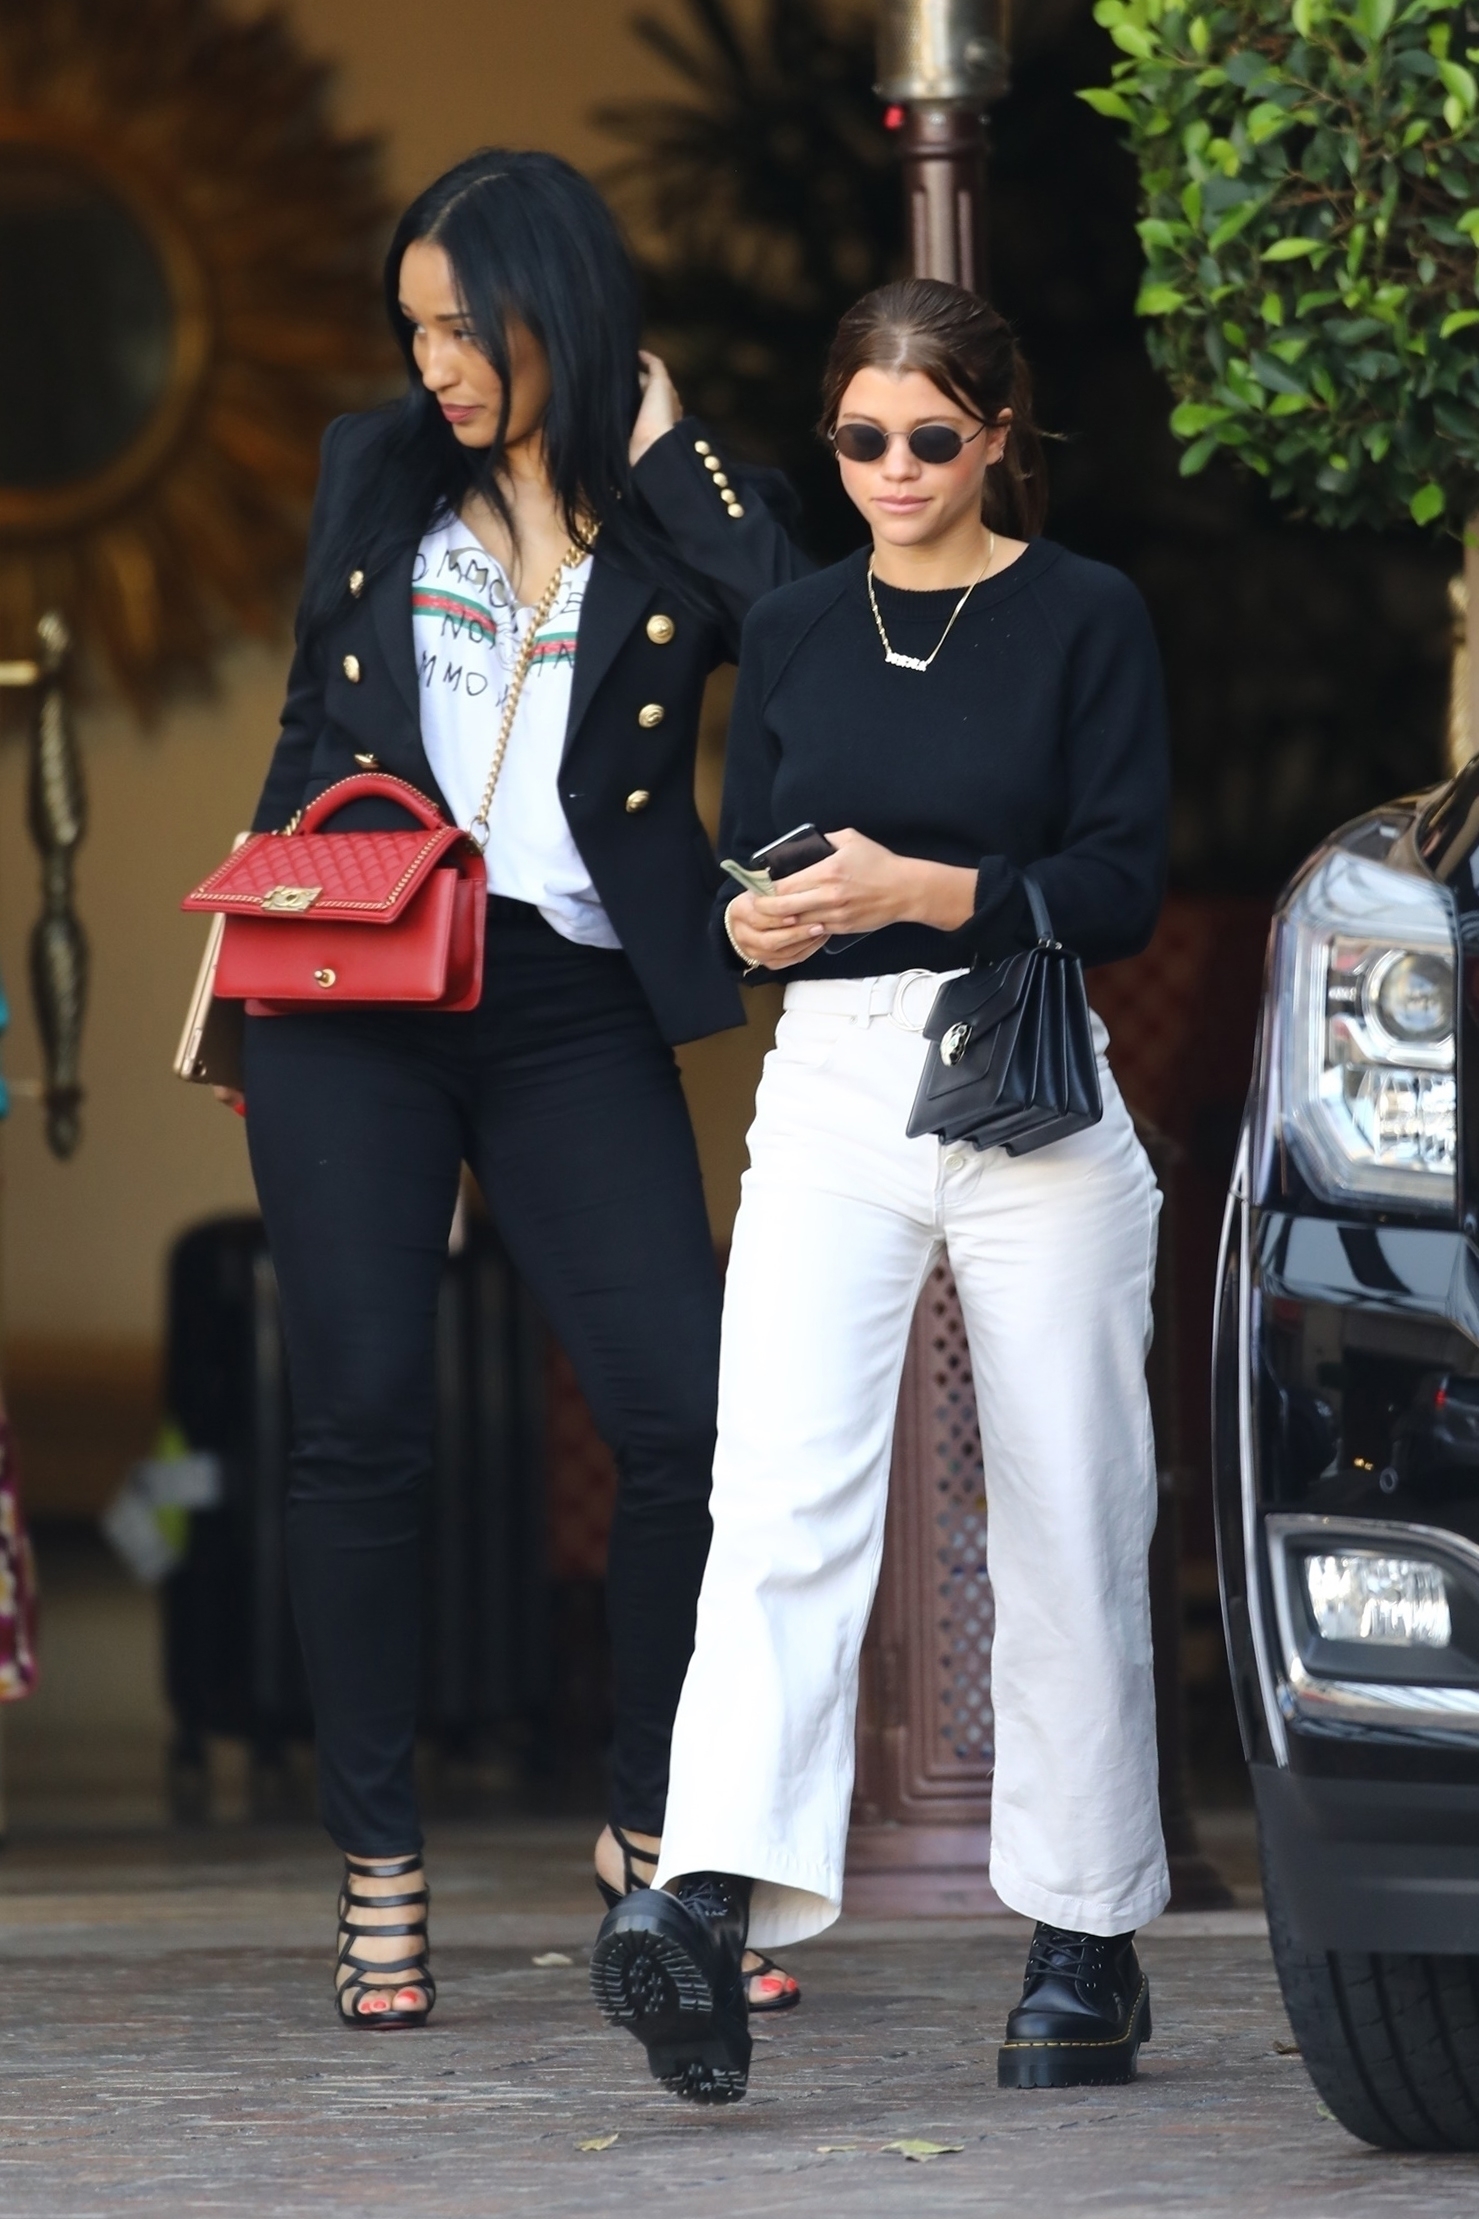 sofia-richie-leaving-the-montage-hotel-in-beverly-hills-4218-10.jpg